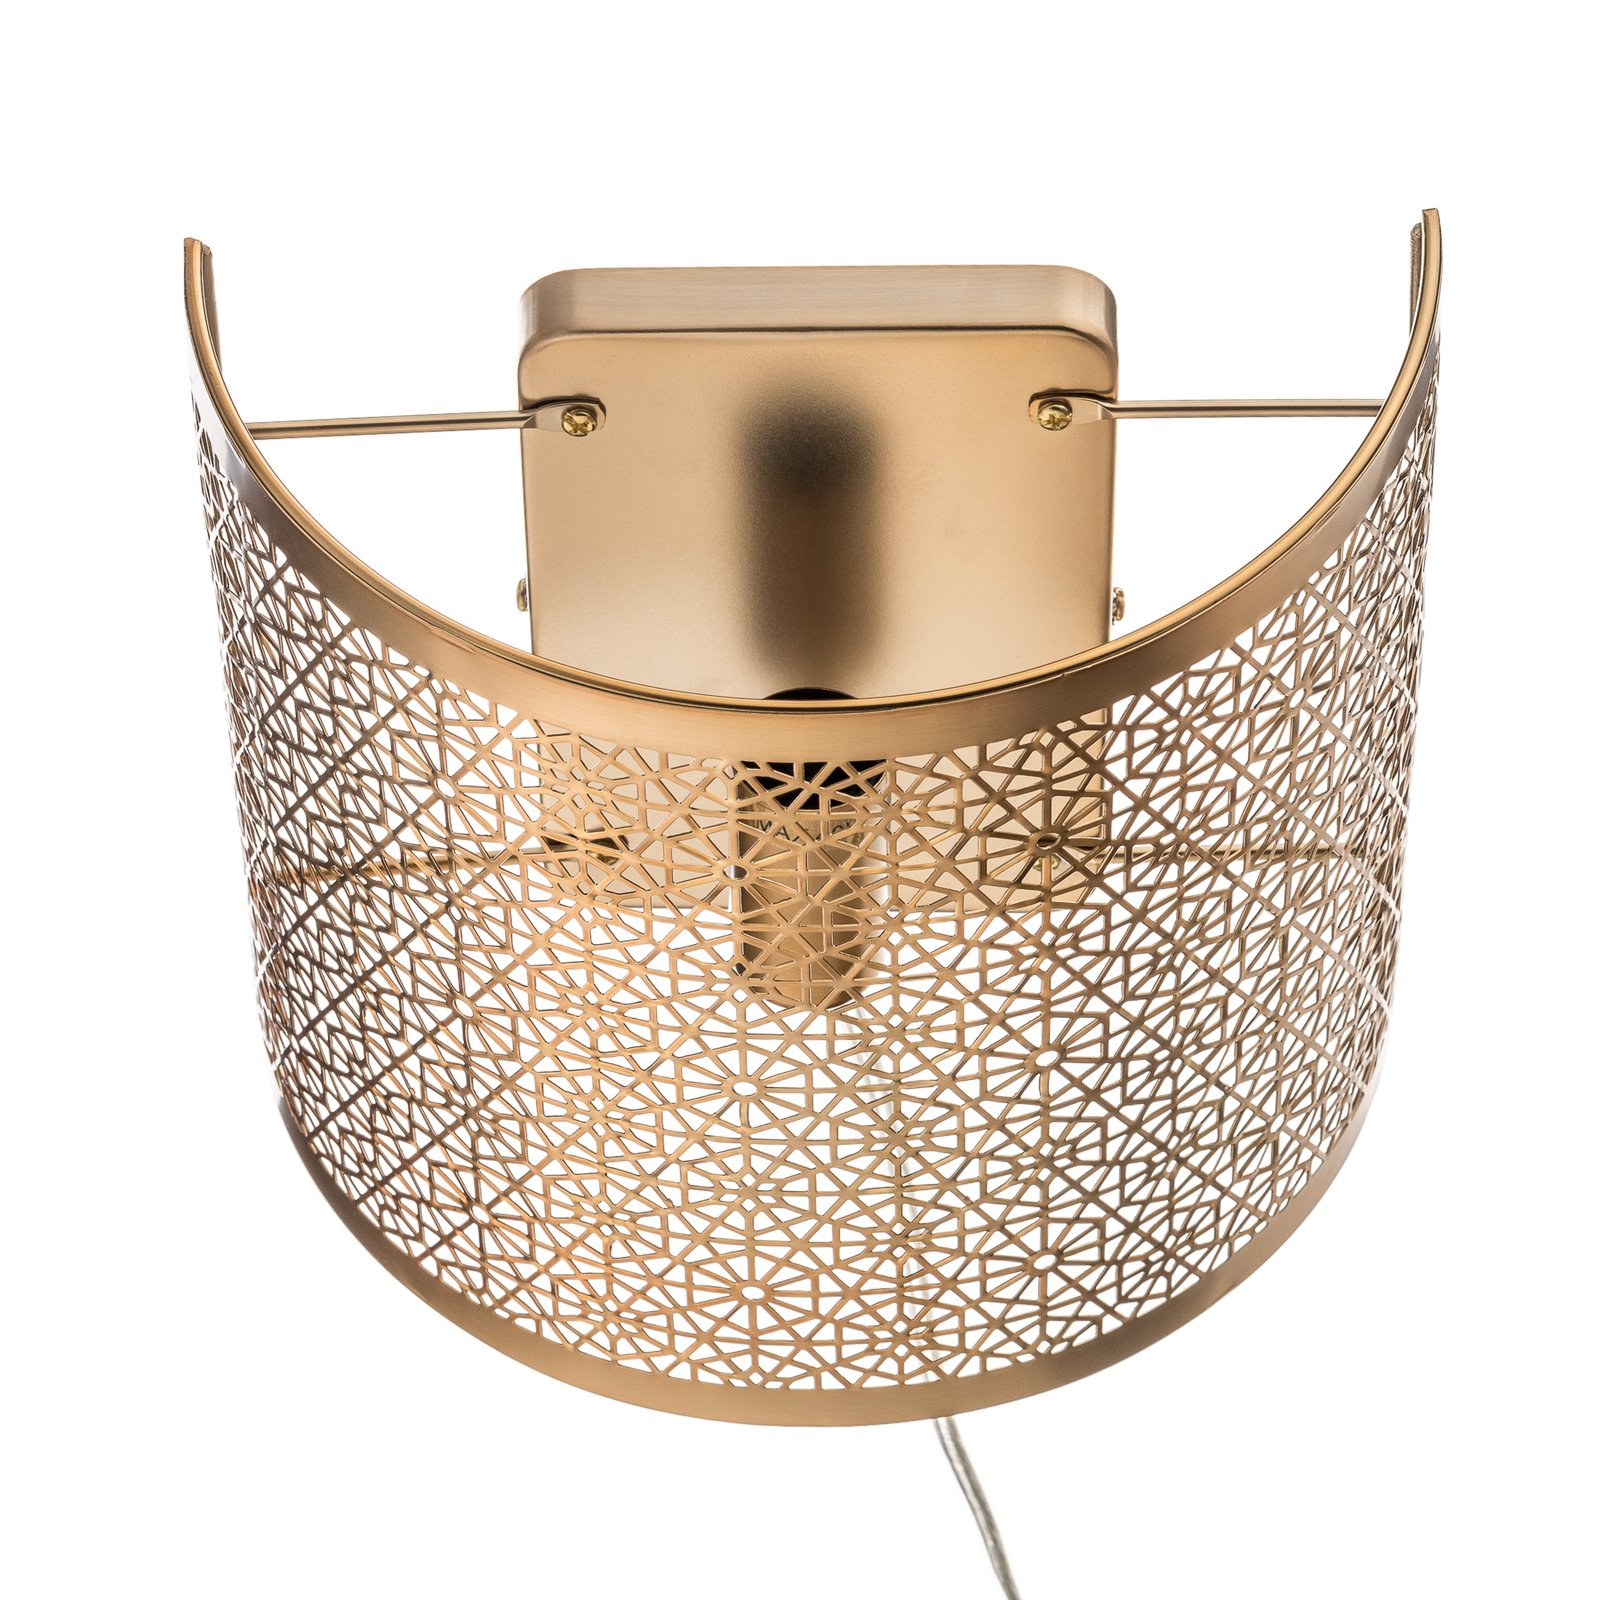 By Rydéns Hermine wall light with cable, brass